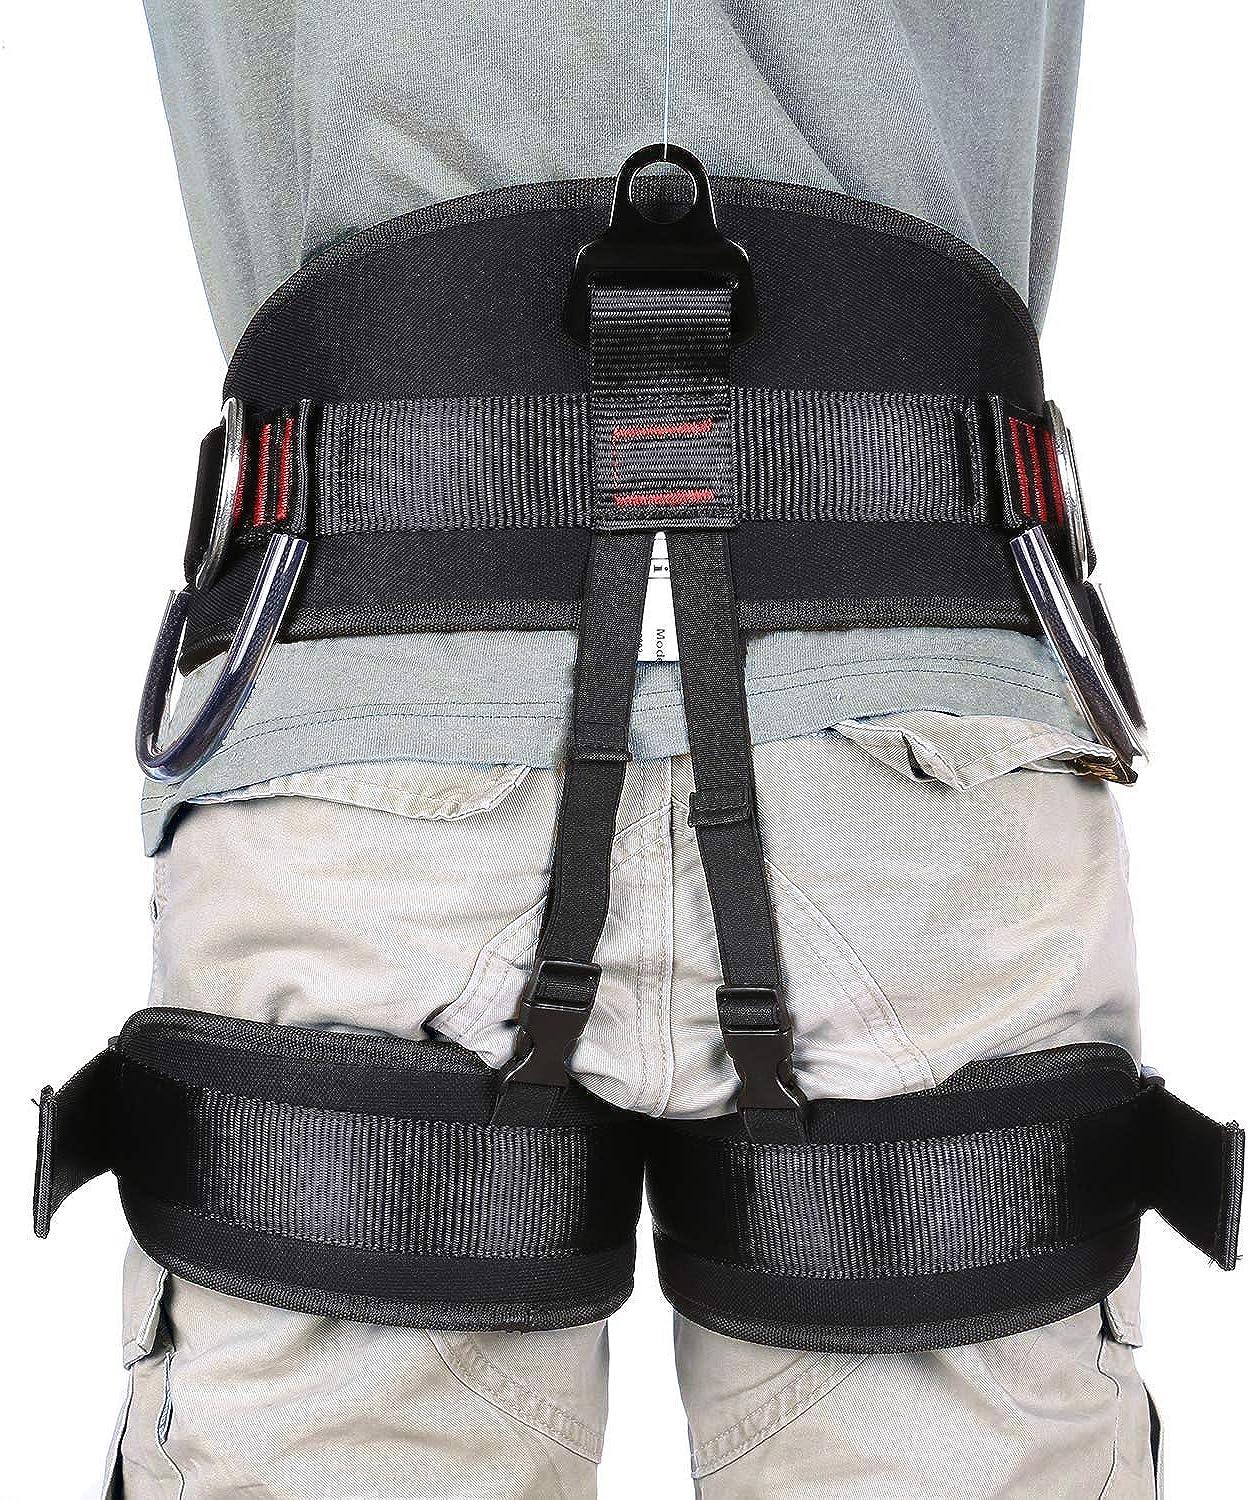 Ttechouter Adjustable Thickness Climbing Harness Half Body